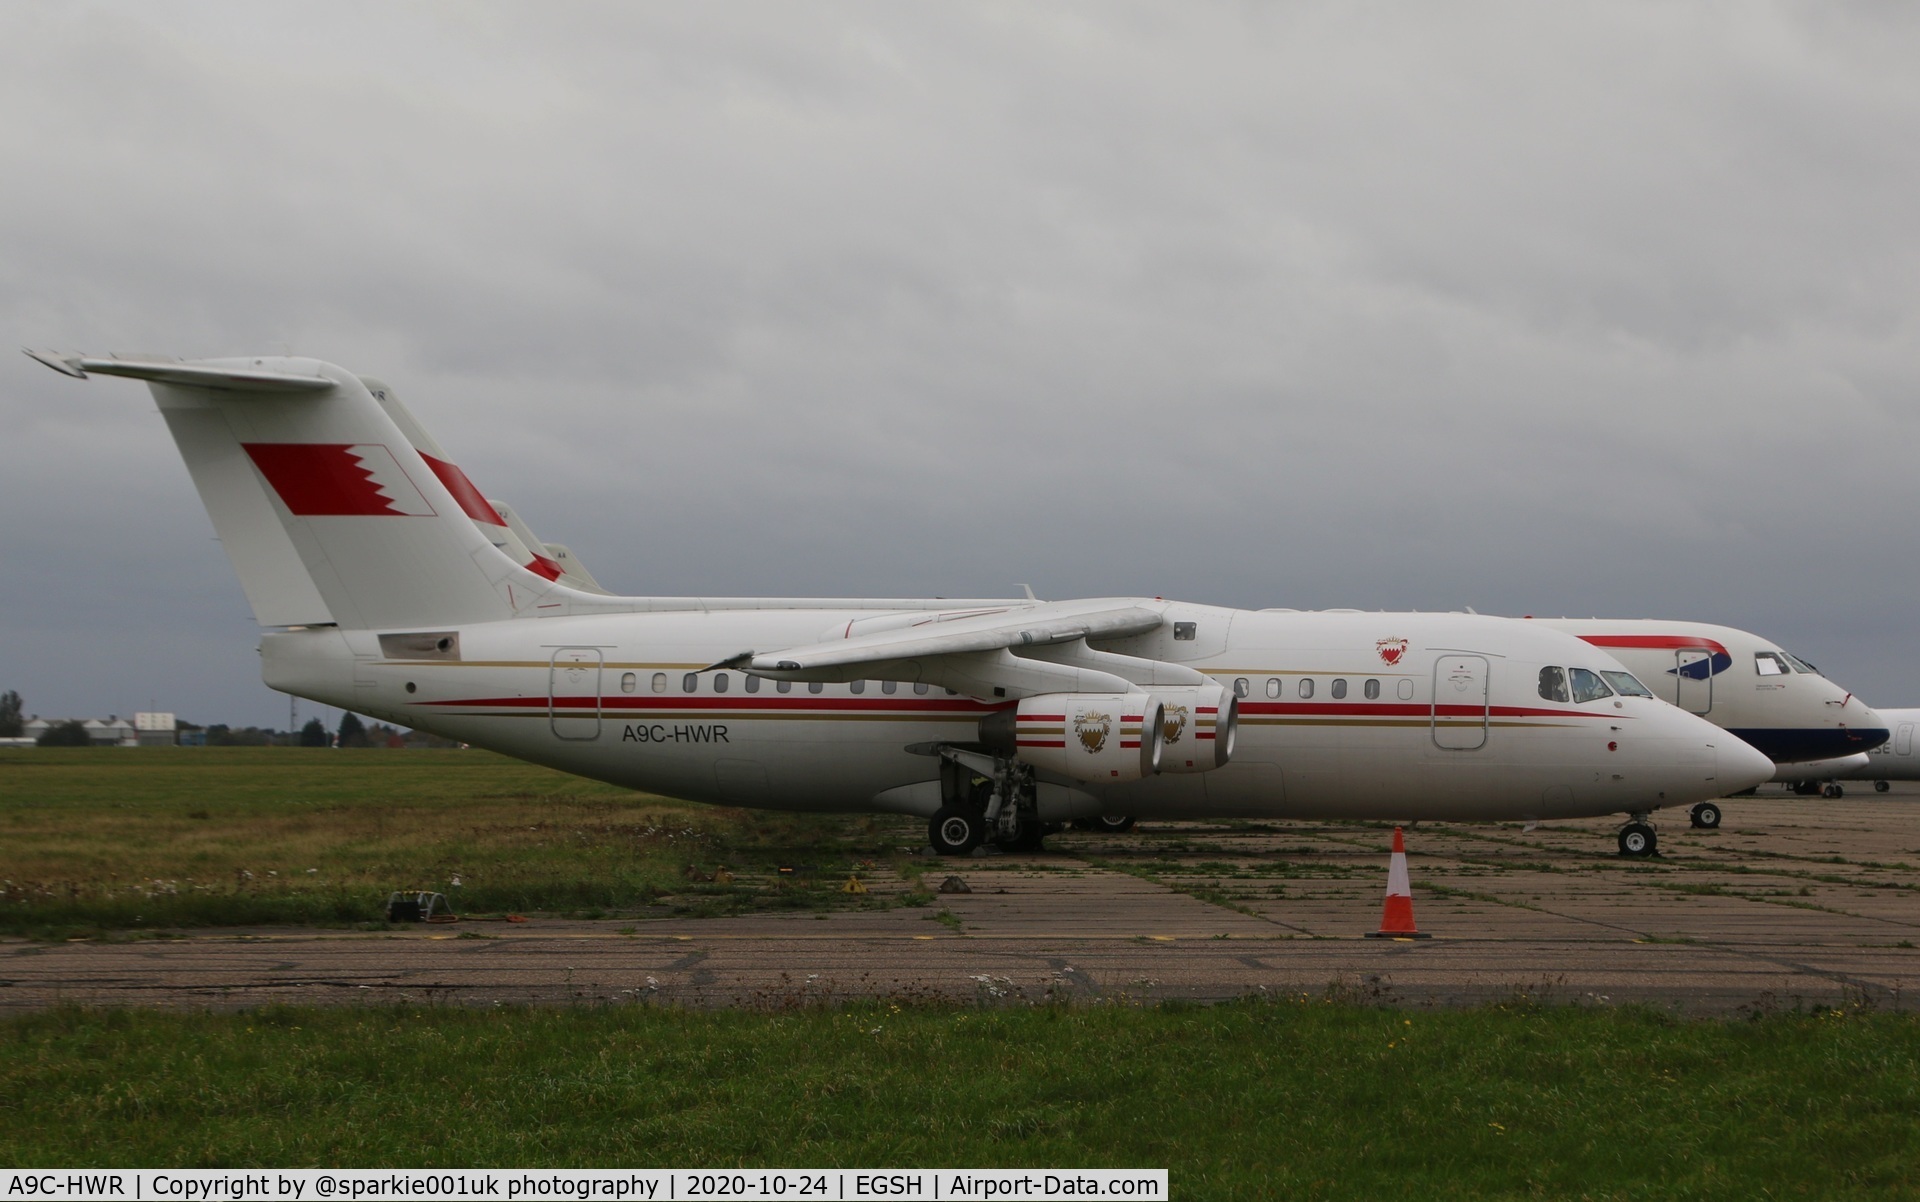 A9C-HWR, 1997 British Aerospace Avro 146-RJ85 C/N E.2306, Seen stored at Norwich North side area, minus some bits